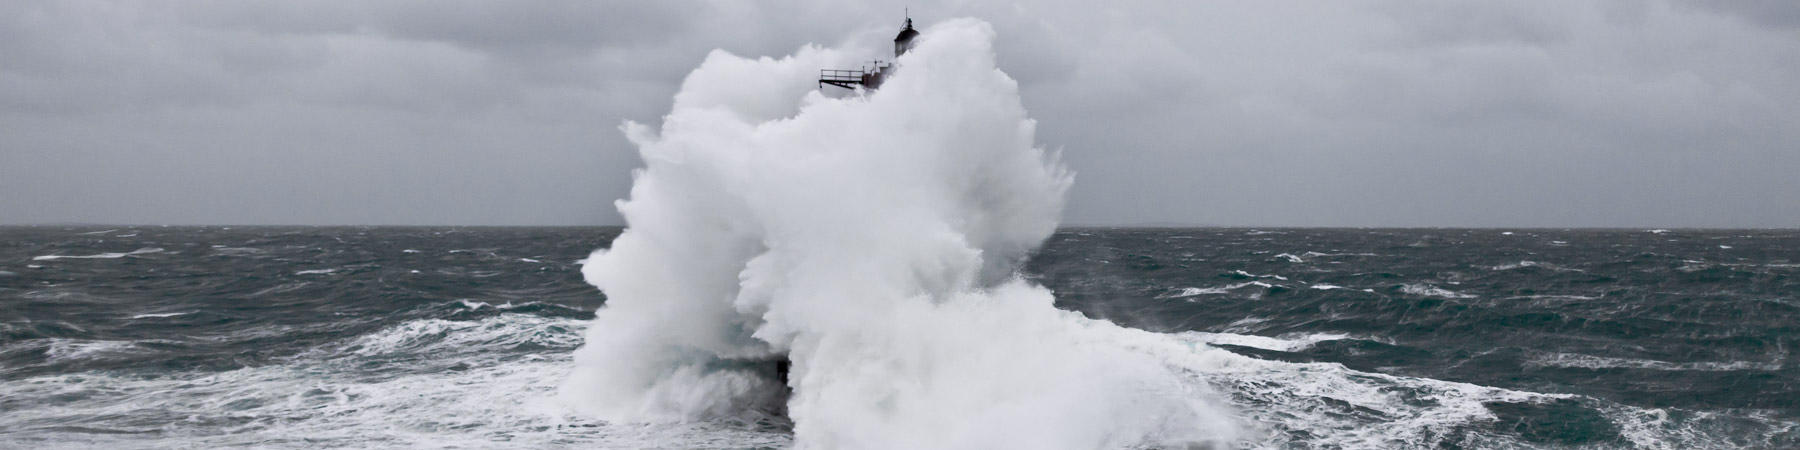 Winters storms on Brittany coasts - Photo Pêcheur d'Images